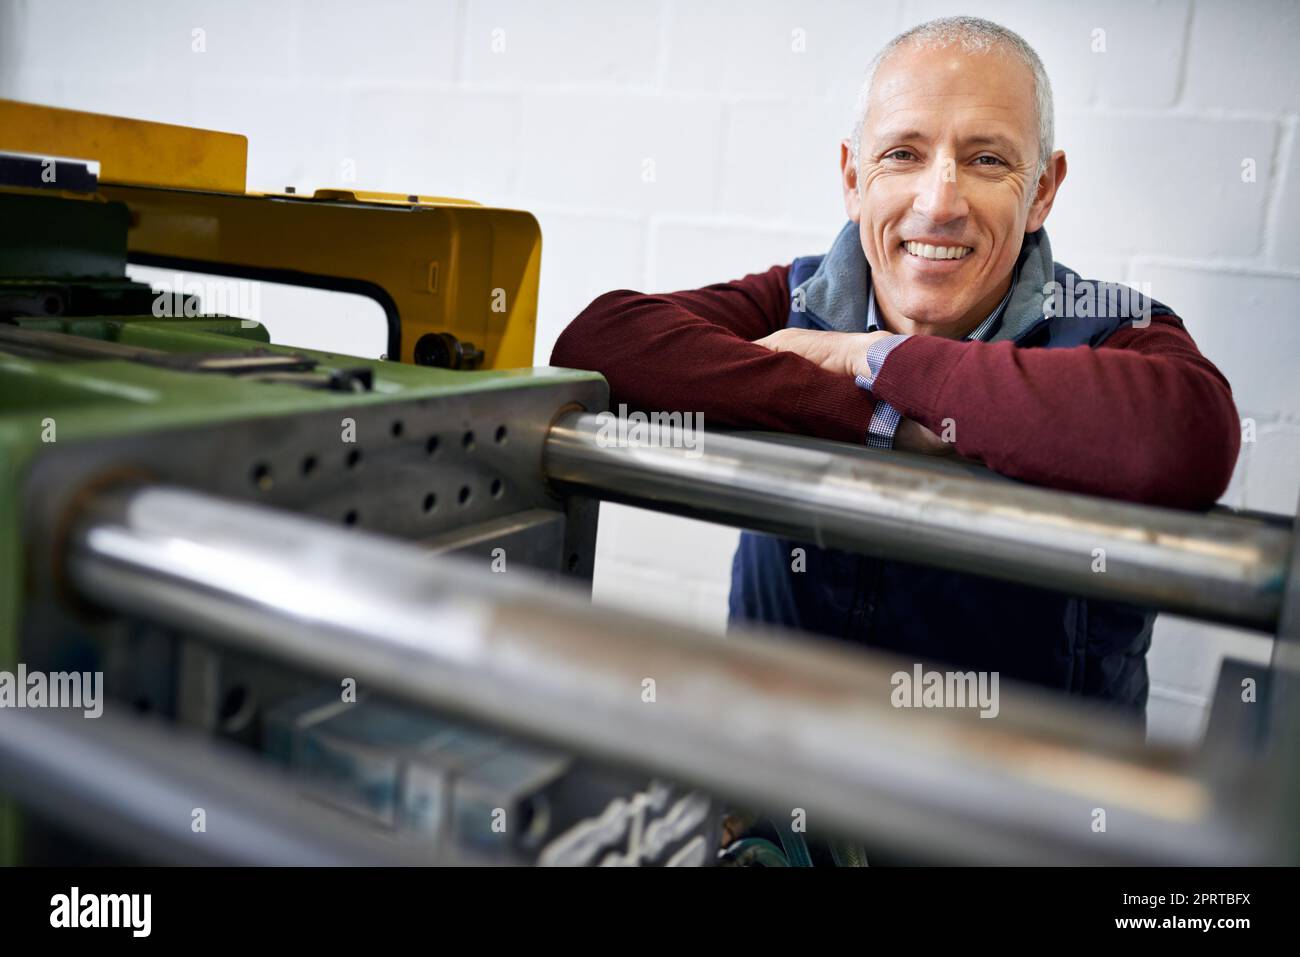 Everything is in perfect working order. Portrait of a mature man standing next to machinery in a factory. Stock Photo